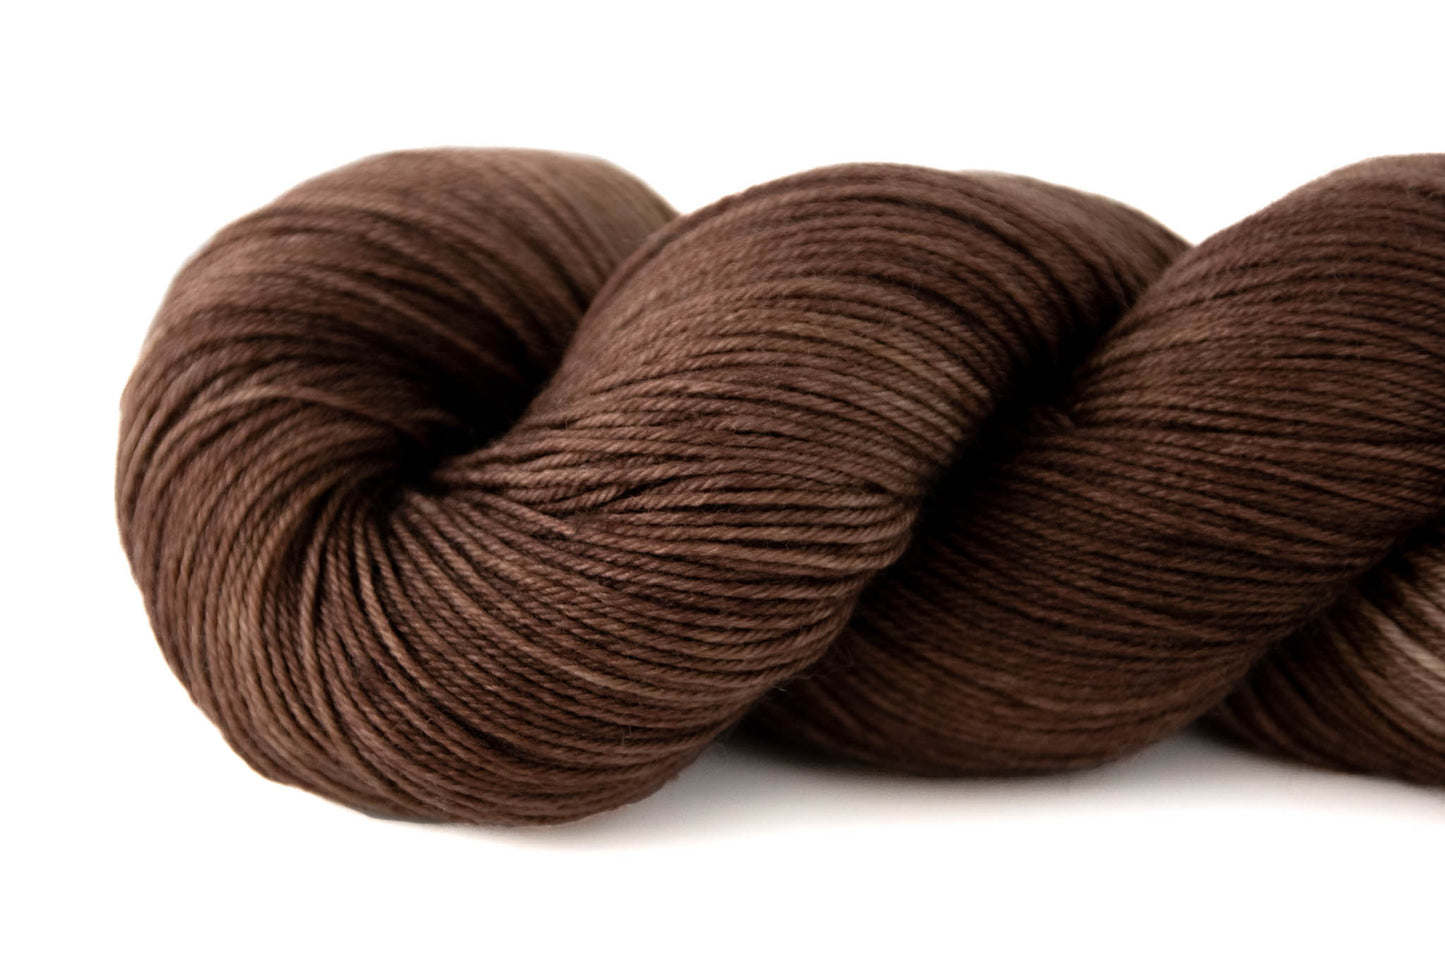 View of lighter and darker brown strands in the same skein.